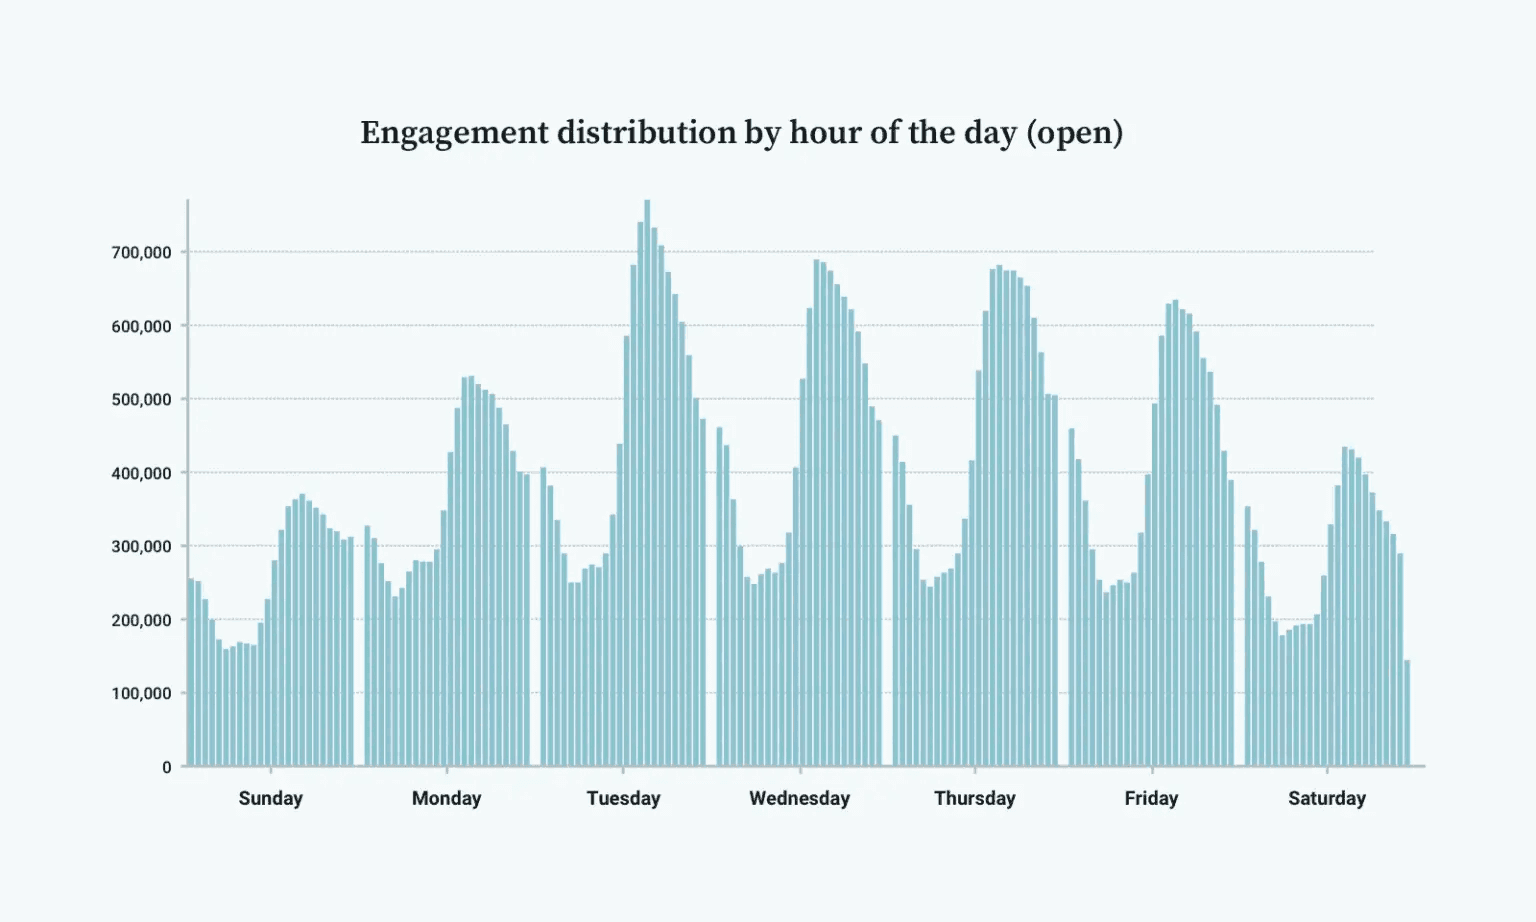 Mailjet's graph showing engagement per hour and day of the week